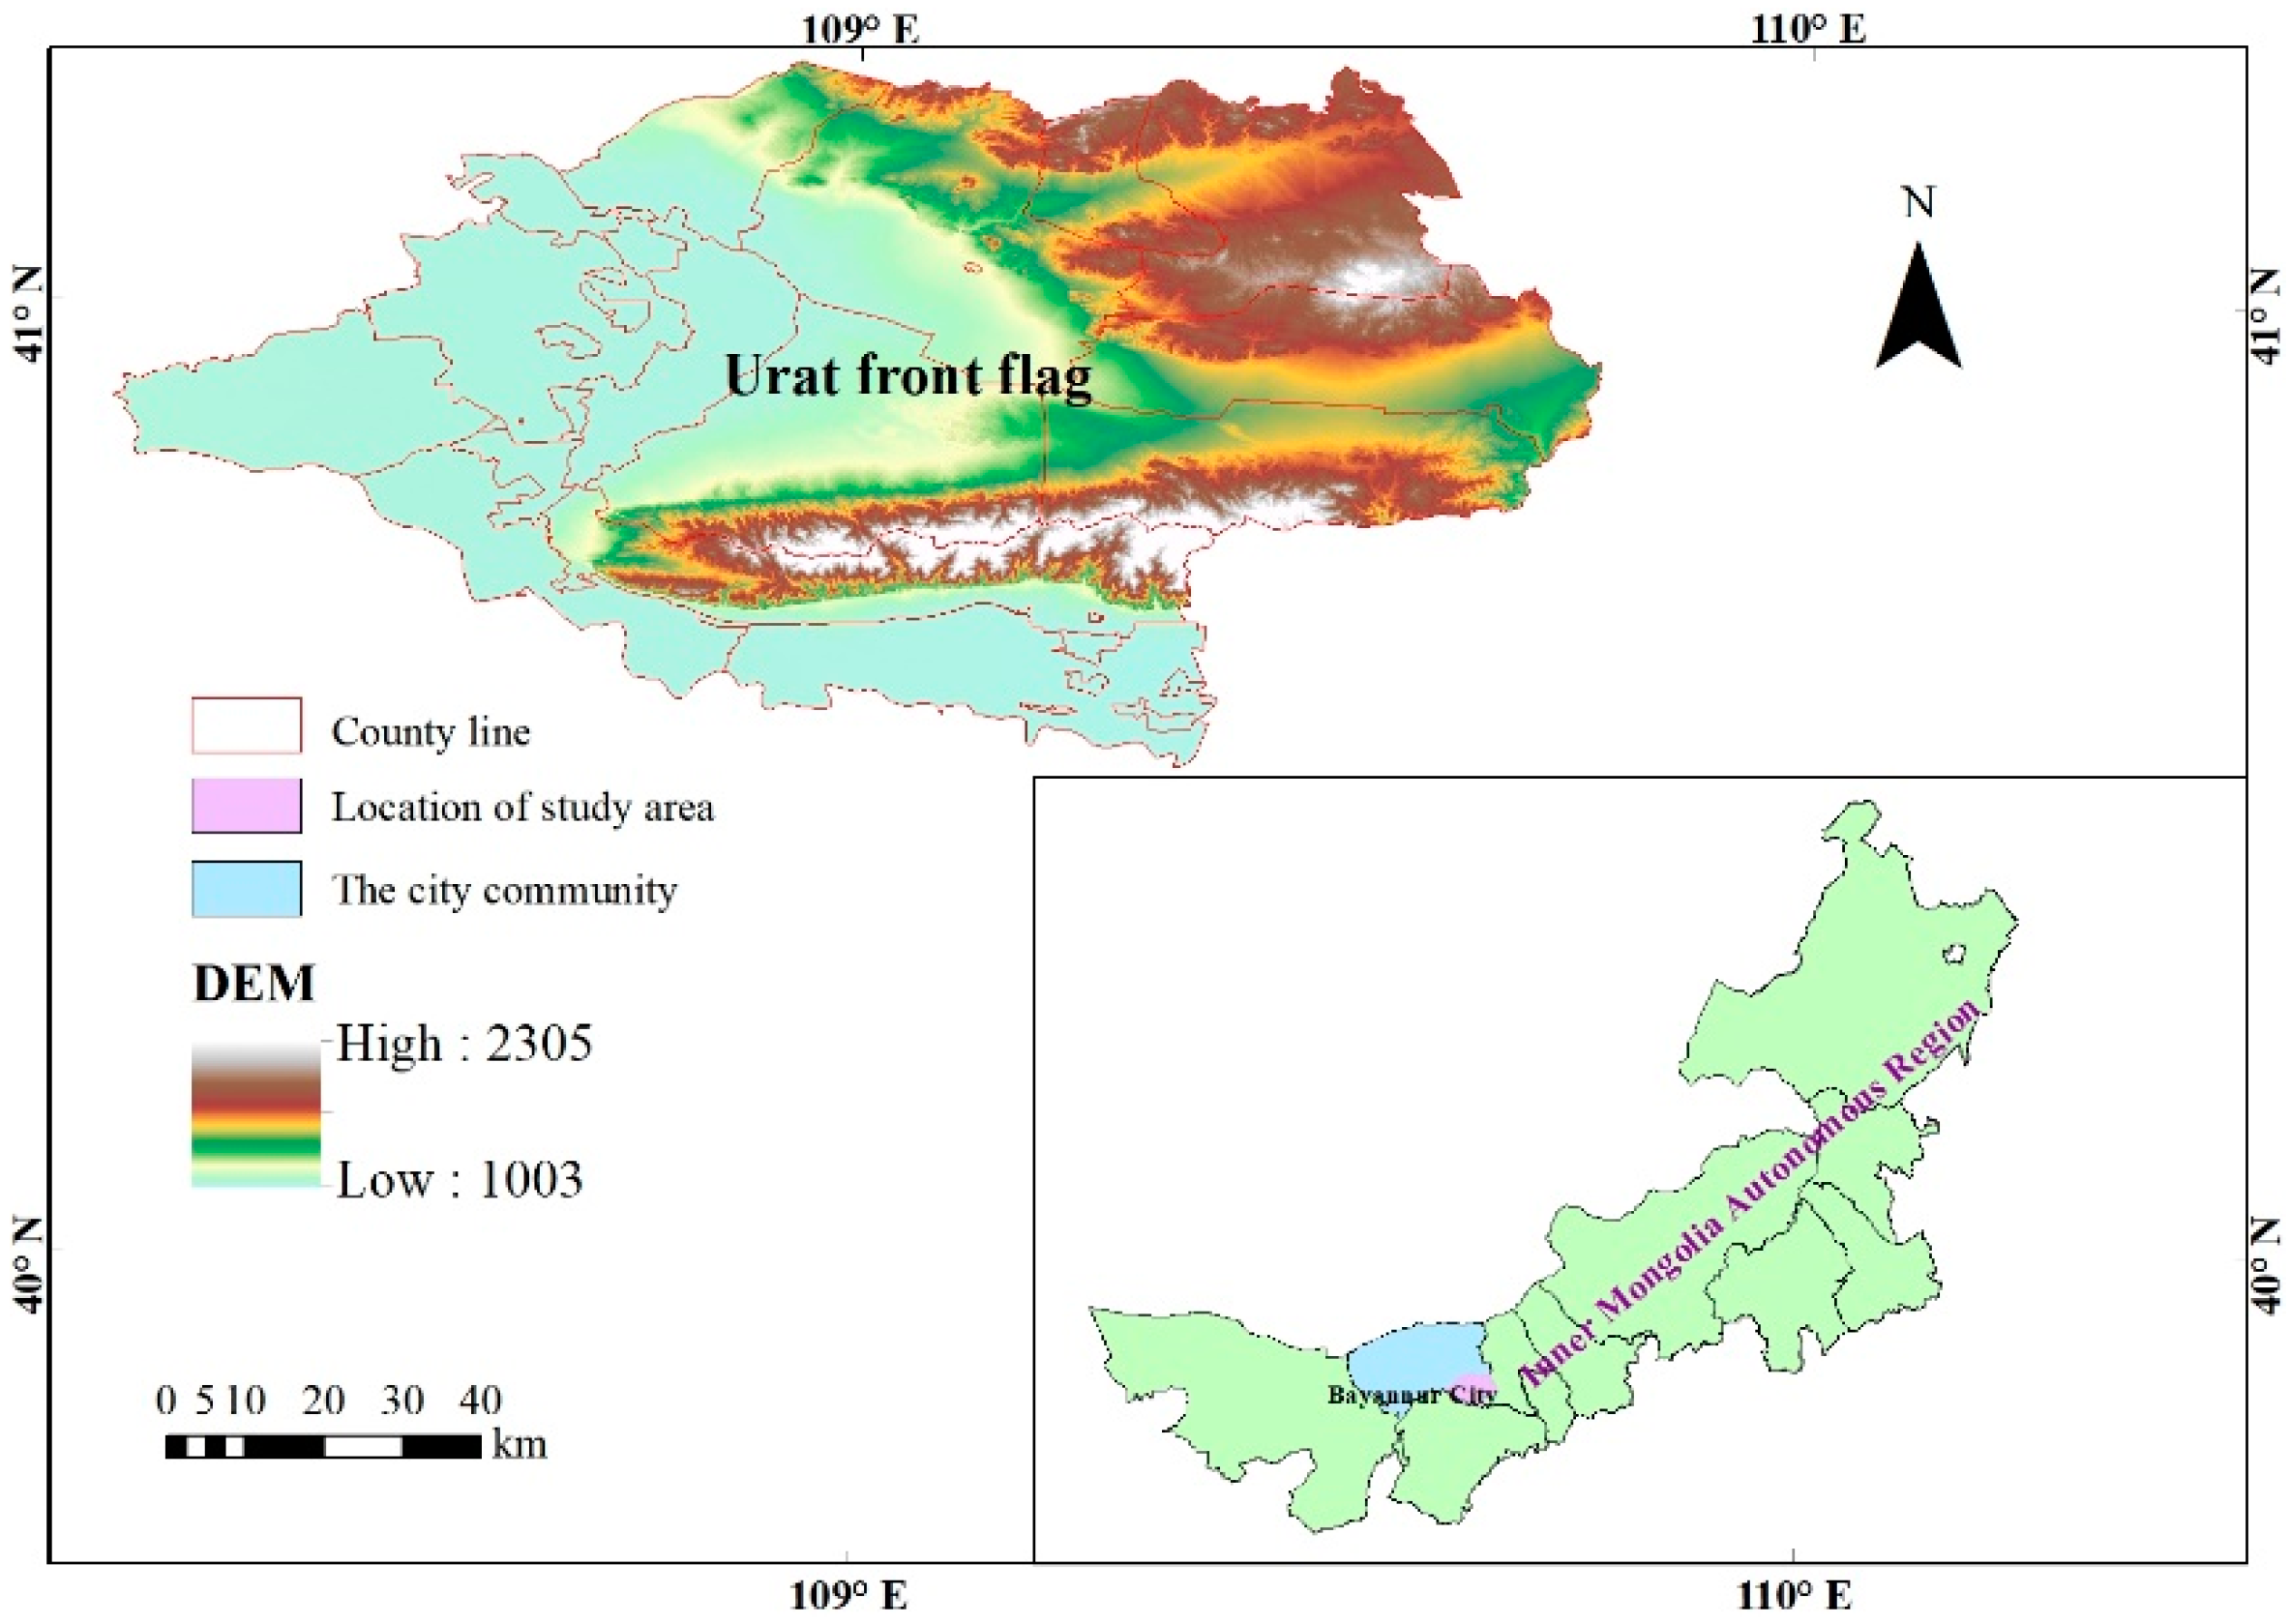 Water | Free Full-Text | Monitoring of Land Desertification Changes in Urat  Front Banner from 2010 to 2020 Based on Remote Sensing Data | HTML